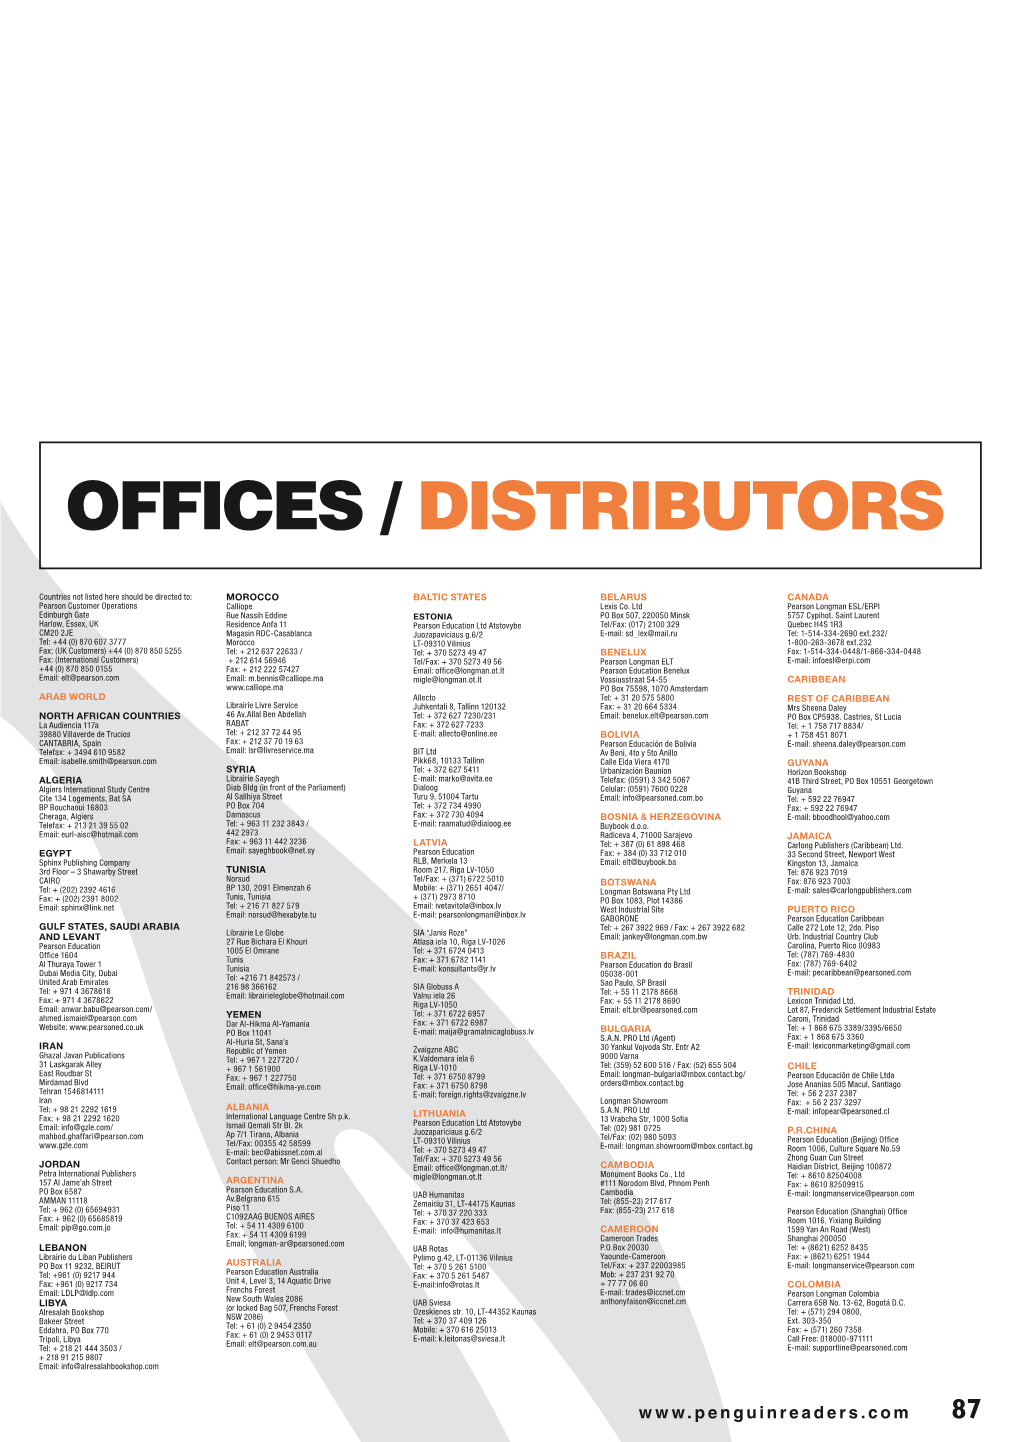 Offices / Distributors